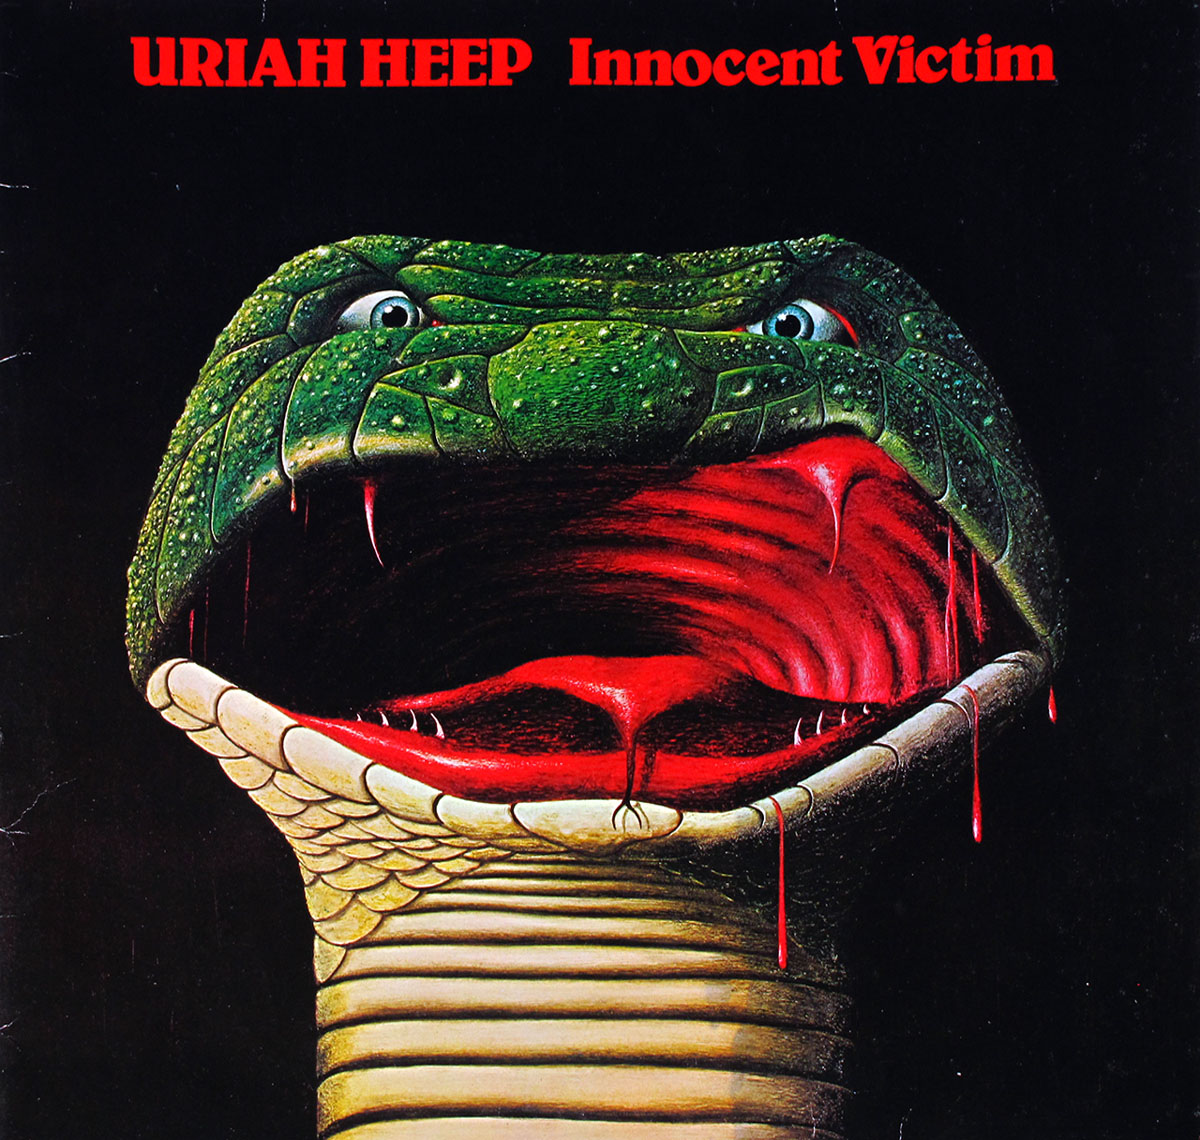 Uriah Heep's 1977 album "Innocent Victim" marked a shift in their musical style. The cover, designed by David Shortt, features an iconic full-page snake head with a large red mouth and tongue, illustrated by John Holmes. This visual element, in tandem with the album's departure from the band's heavier sound, contributes to the album's significance in showcasing artistic evolution within the rock music landscape during its release period.